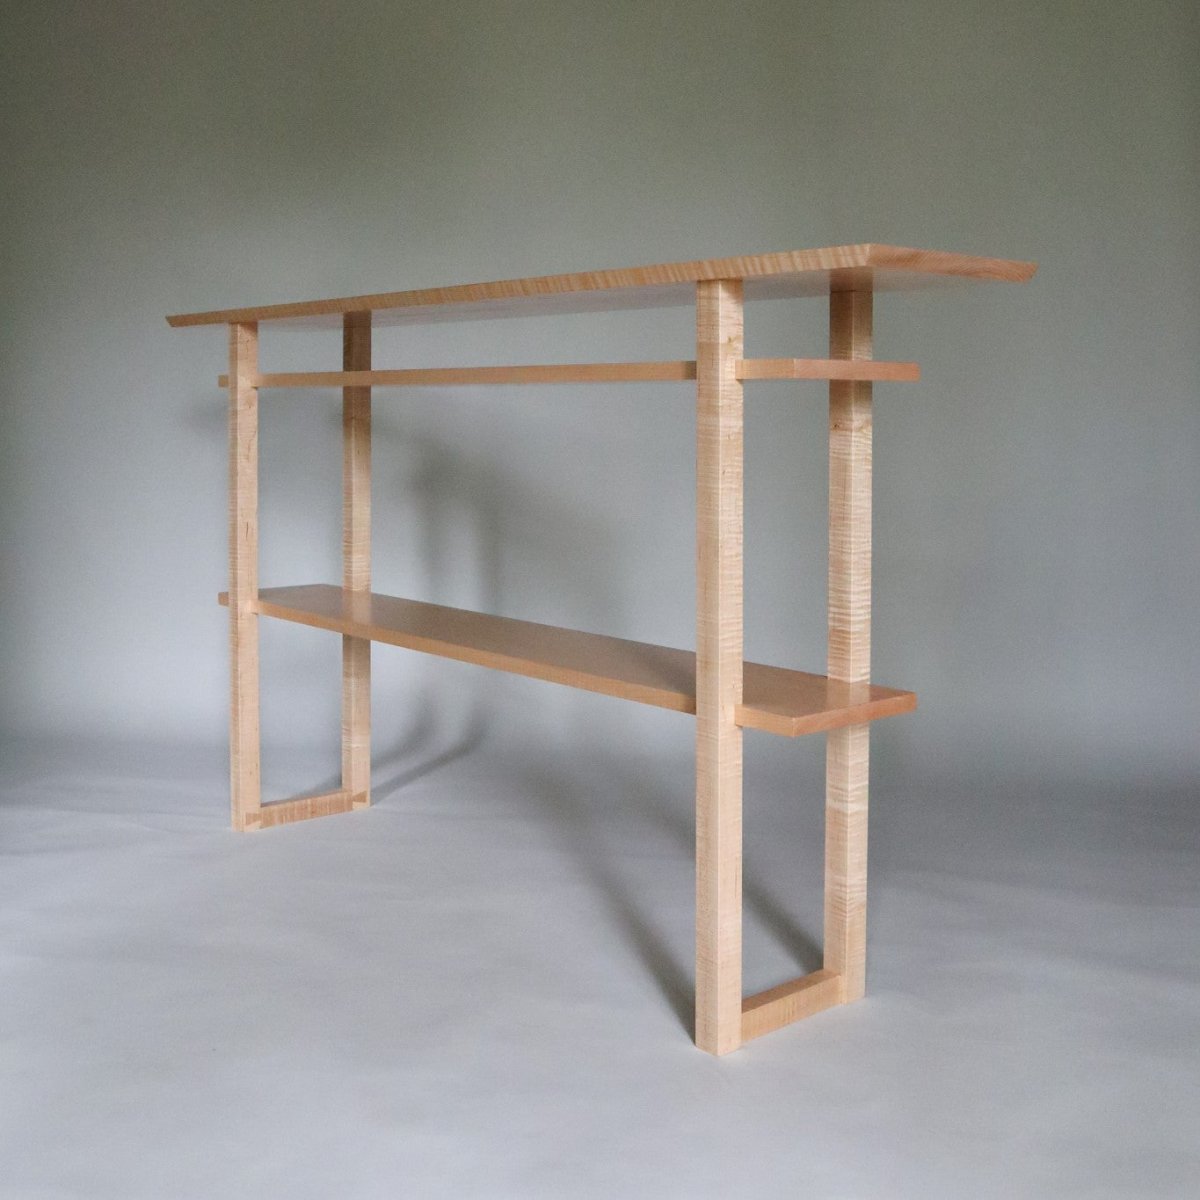 A hallway console table with shelves that is perfect as an entryway table too!  By Mokuzai Furniture